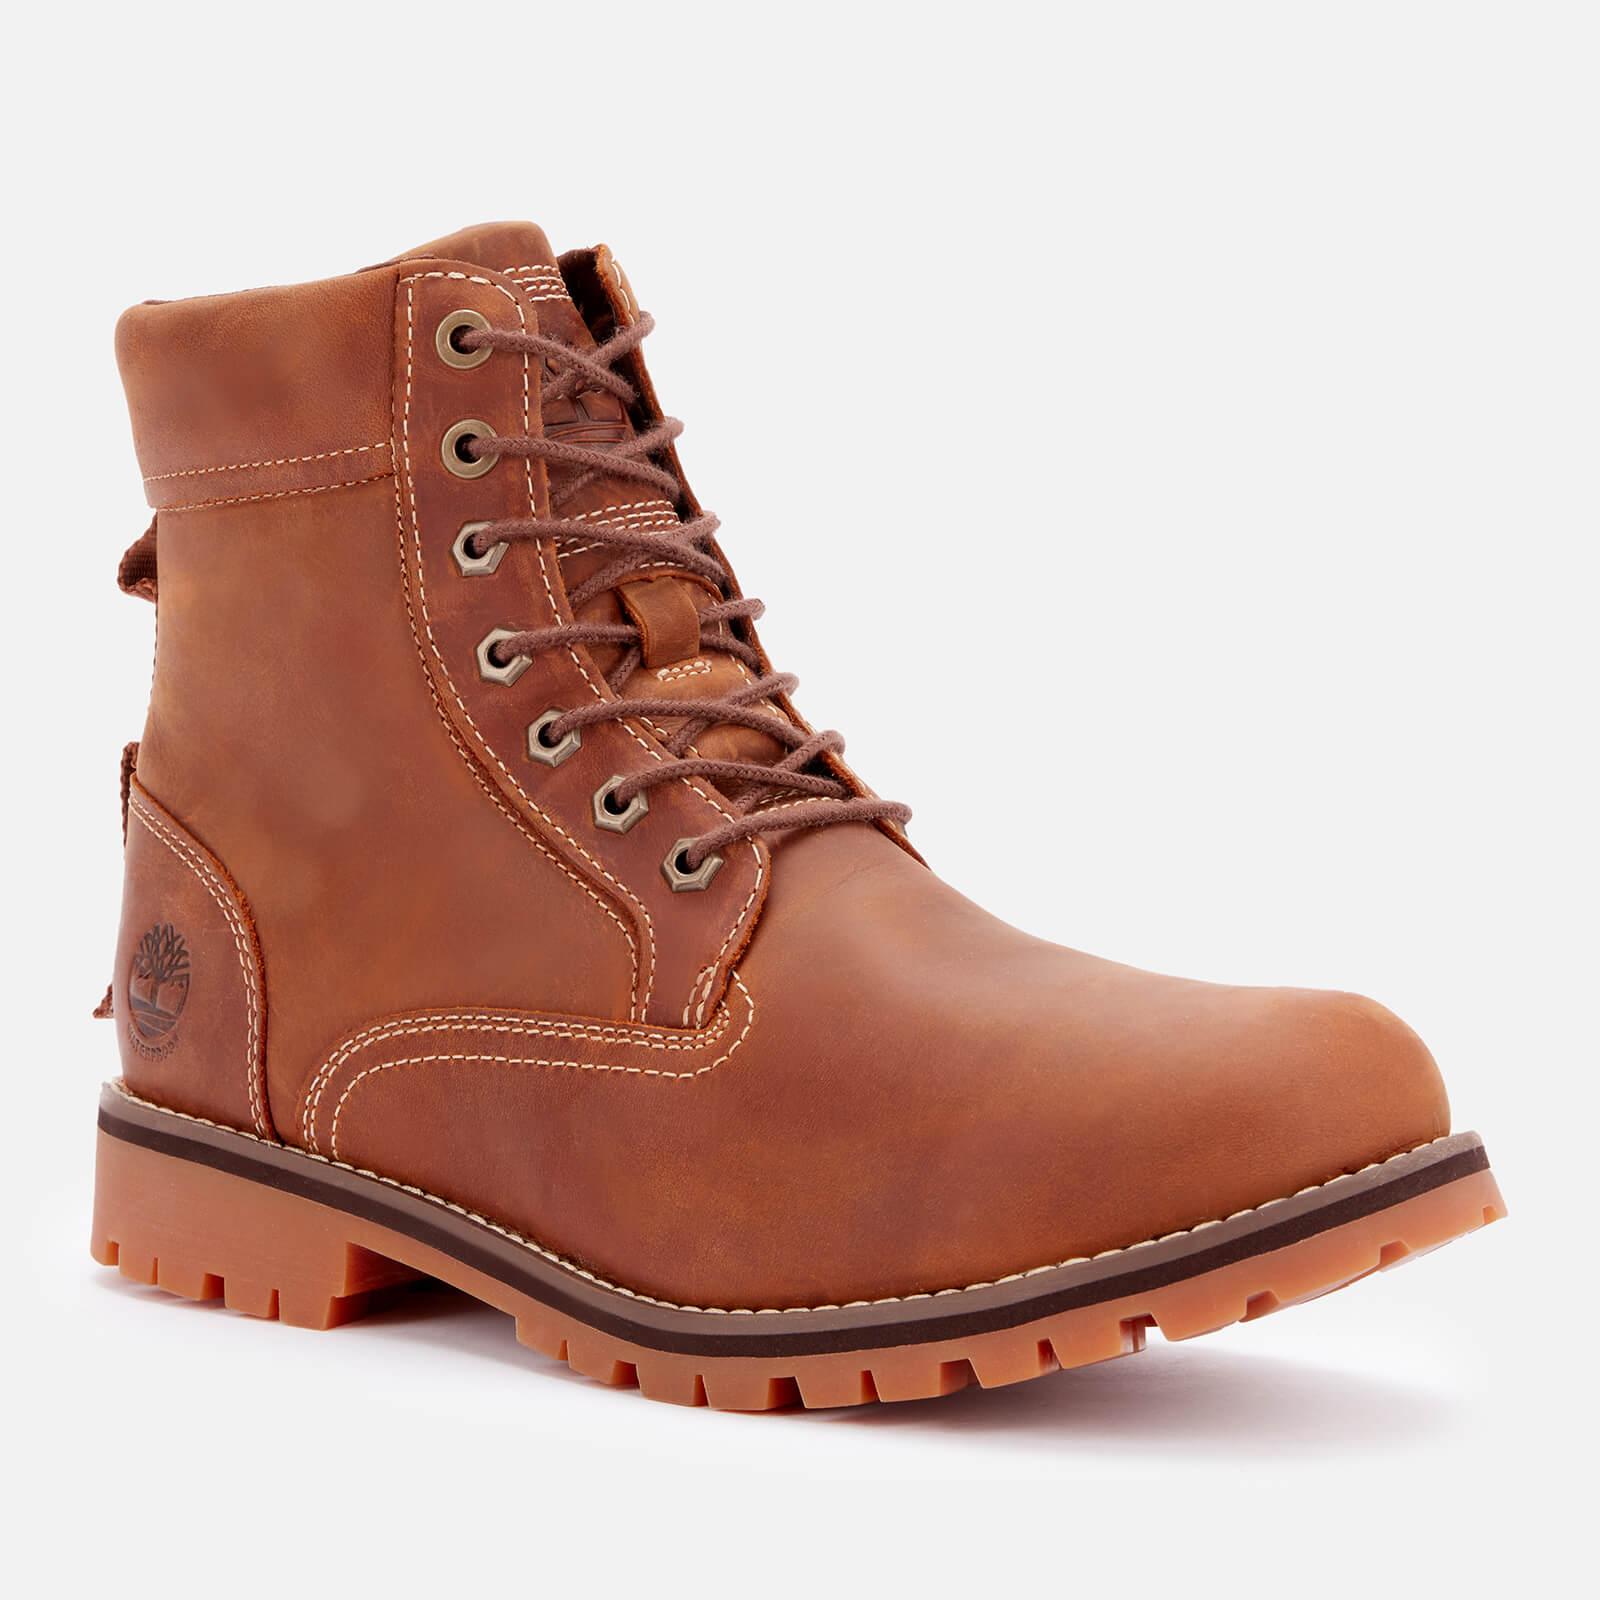 Rugged Waterproof Leather 6 Inch Boots in Men | Lyst